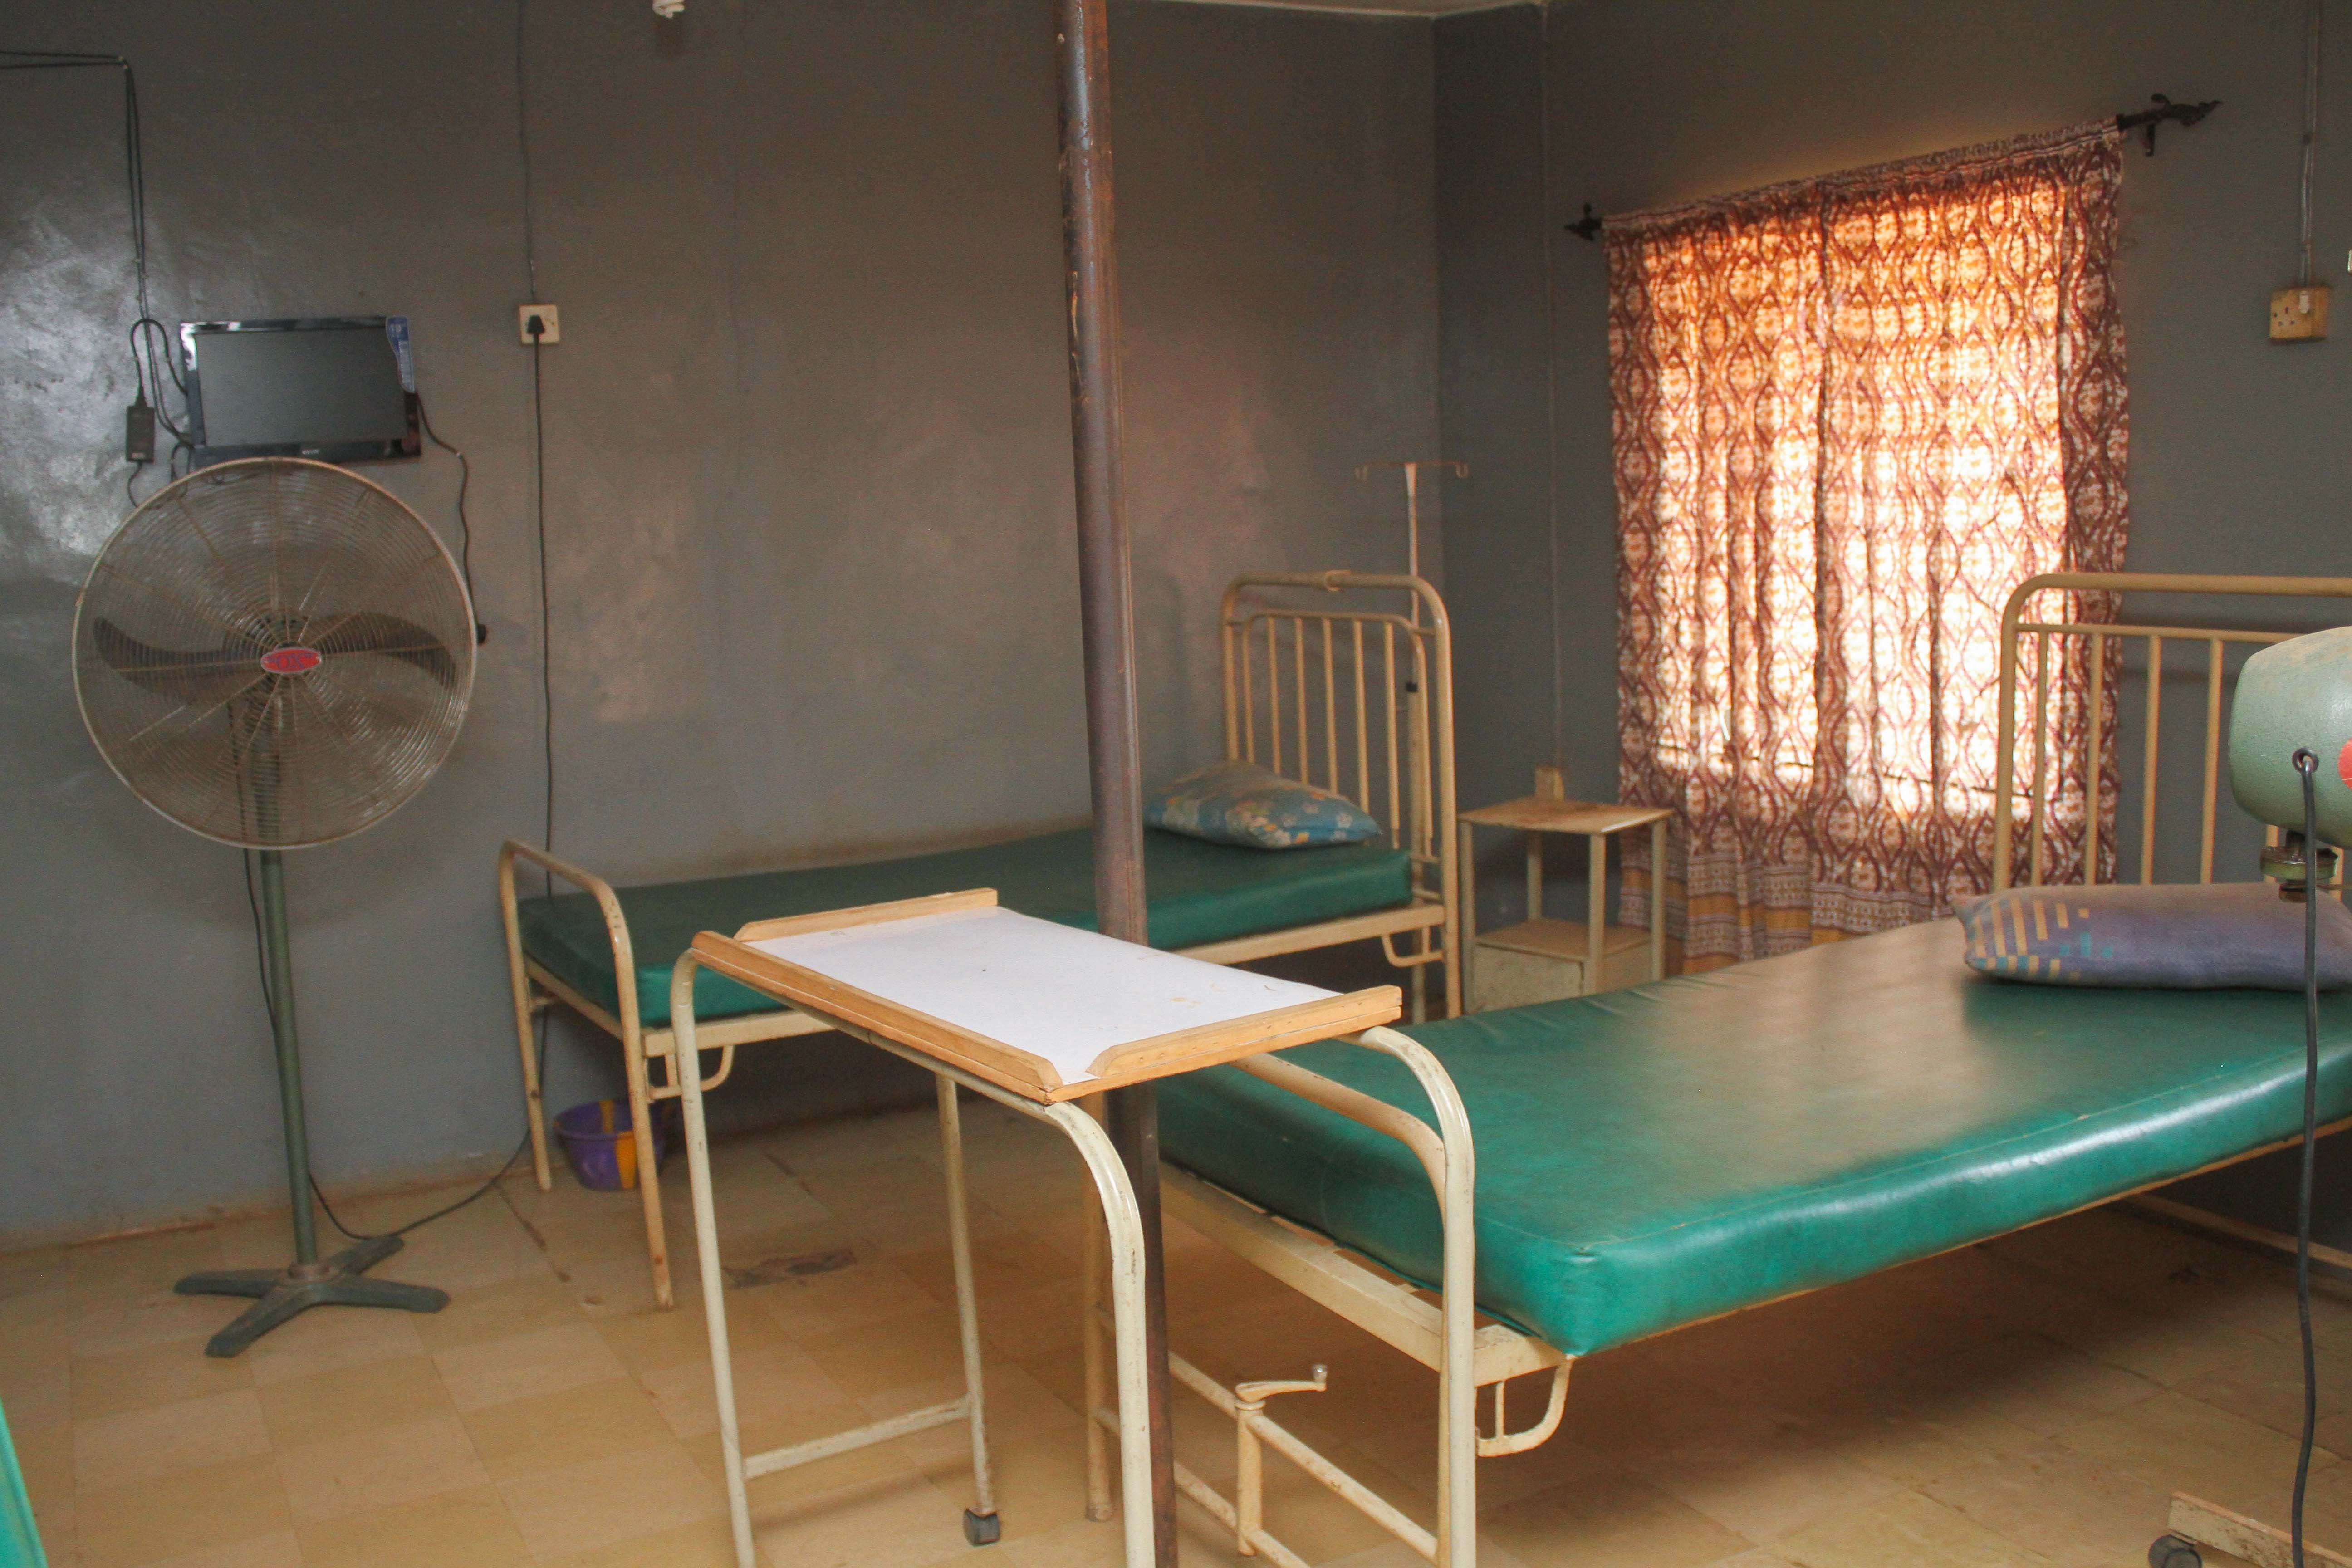 School Clinic Ward For Students On Medical Admission